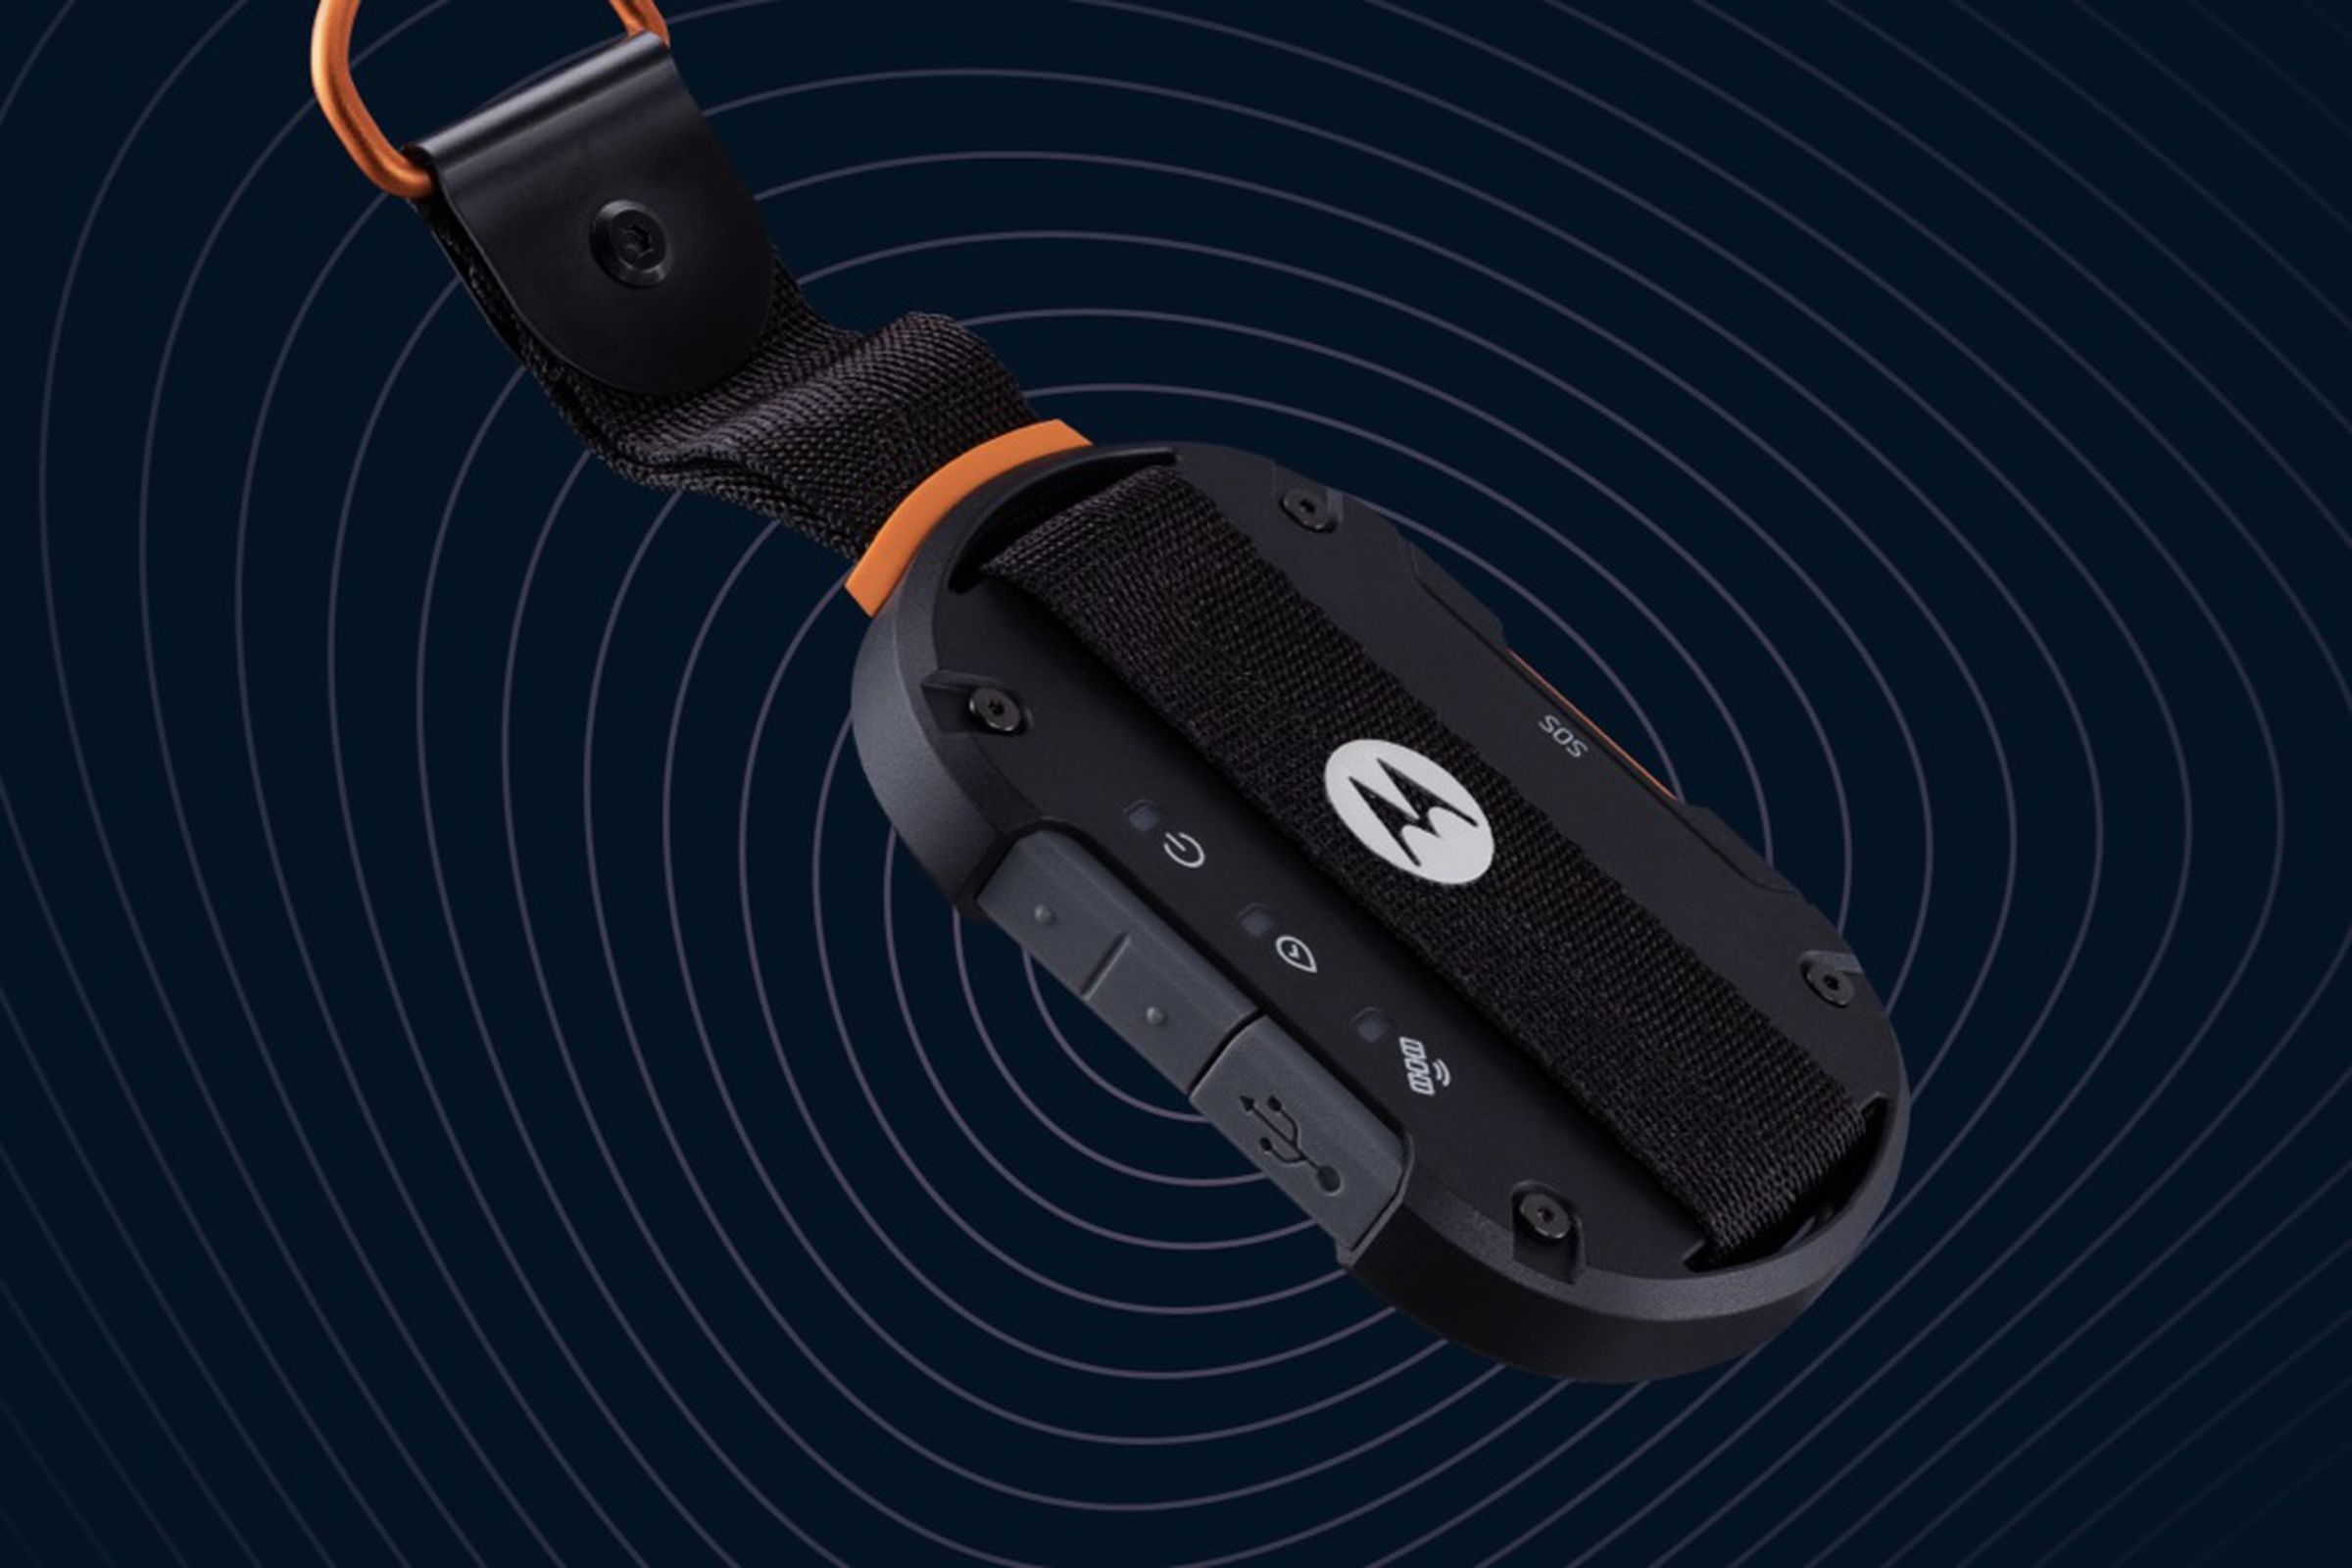 The defy satellite link looks like a car key fob on a keychain with an orange key loop. It’s got a M logo in the middle, waterproof covered USB port, and buttons on the side.